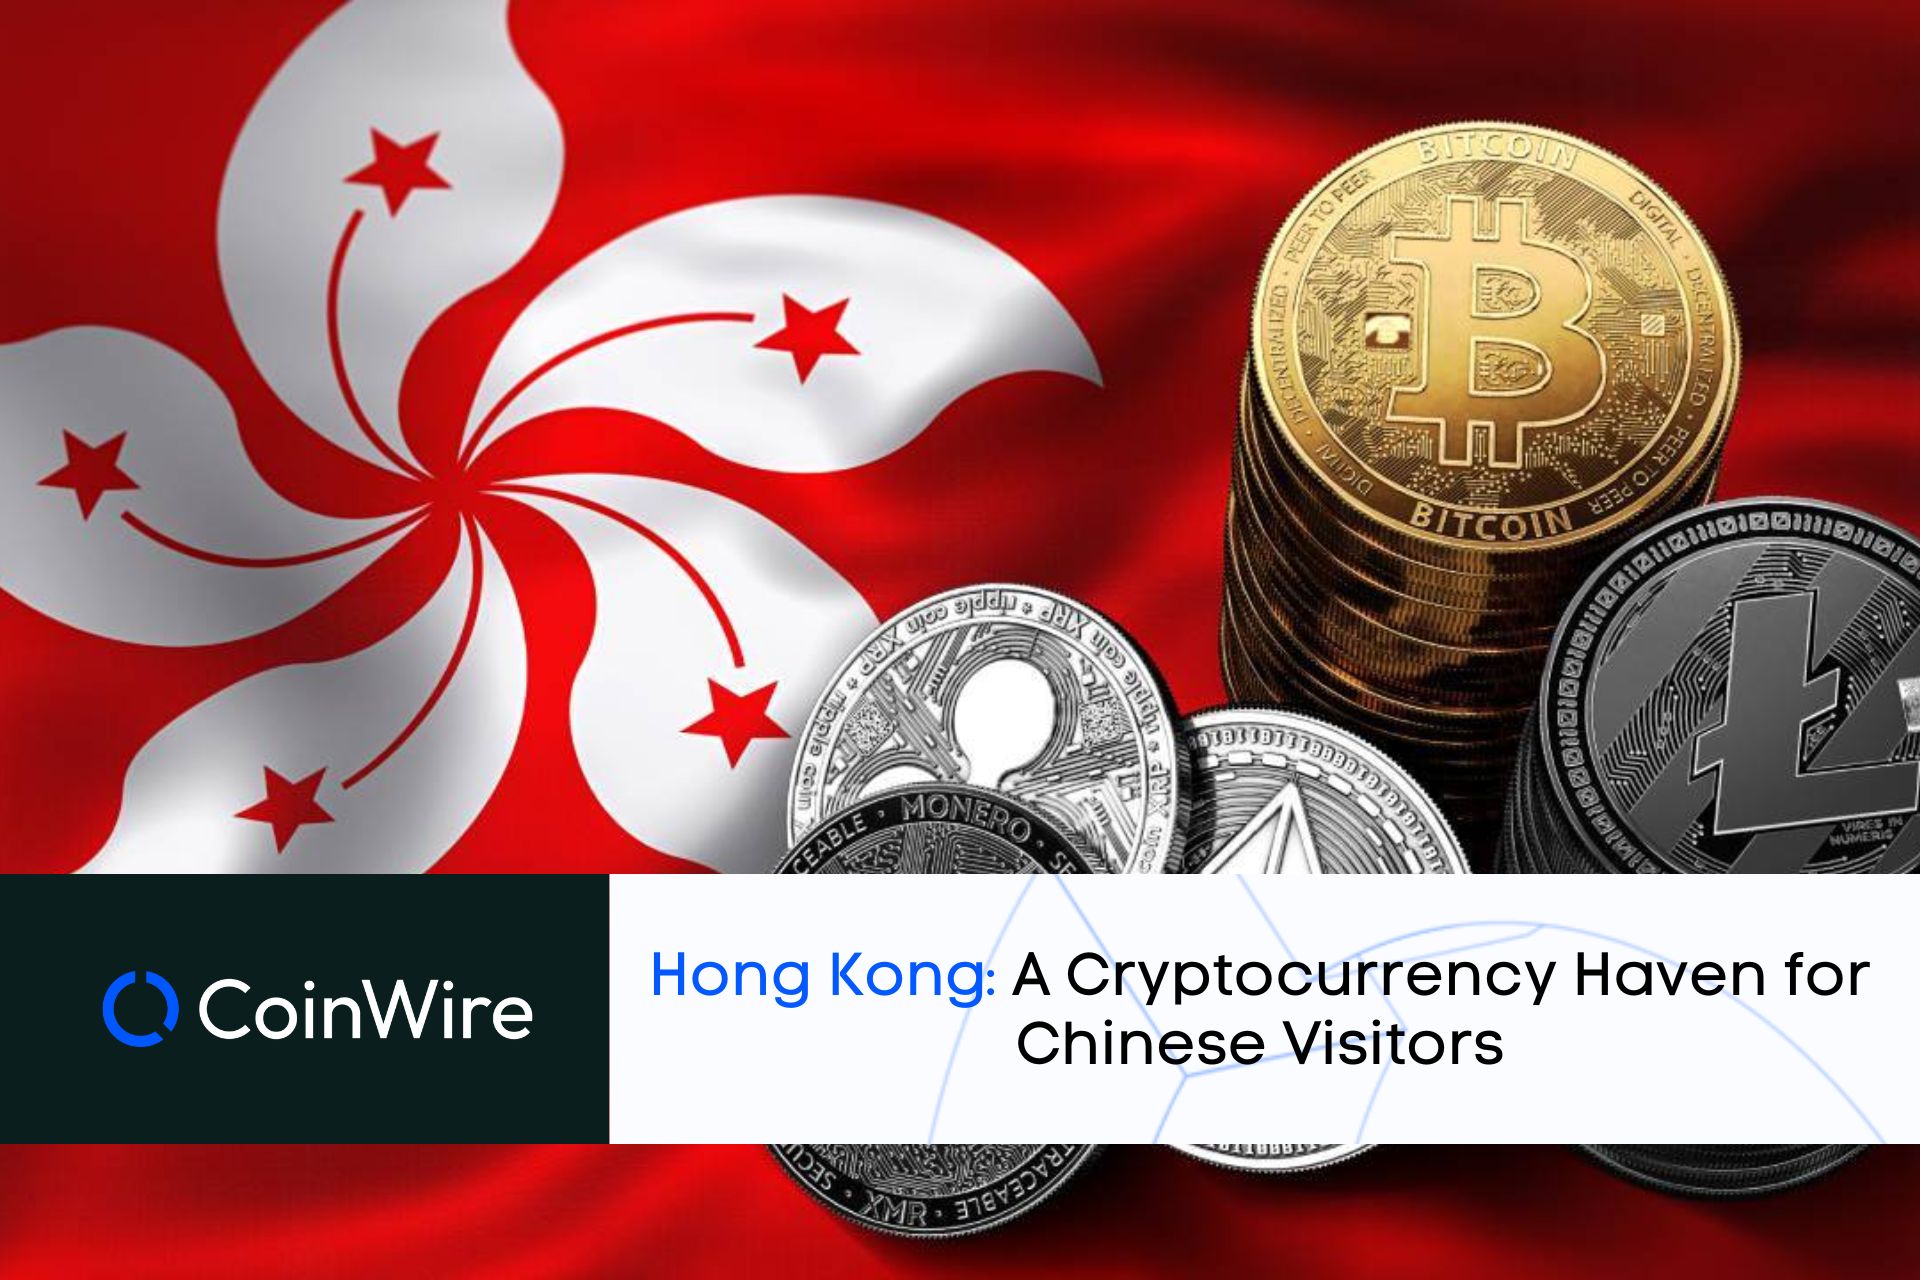 Hong Kong: A Cryptocurrency Haven For Chinese Visitors